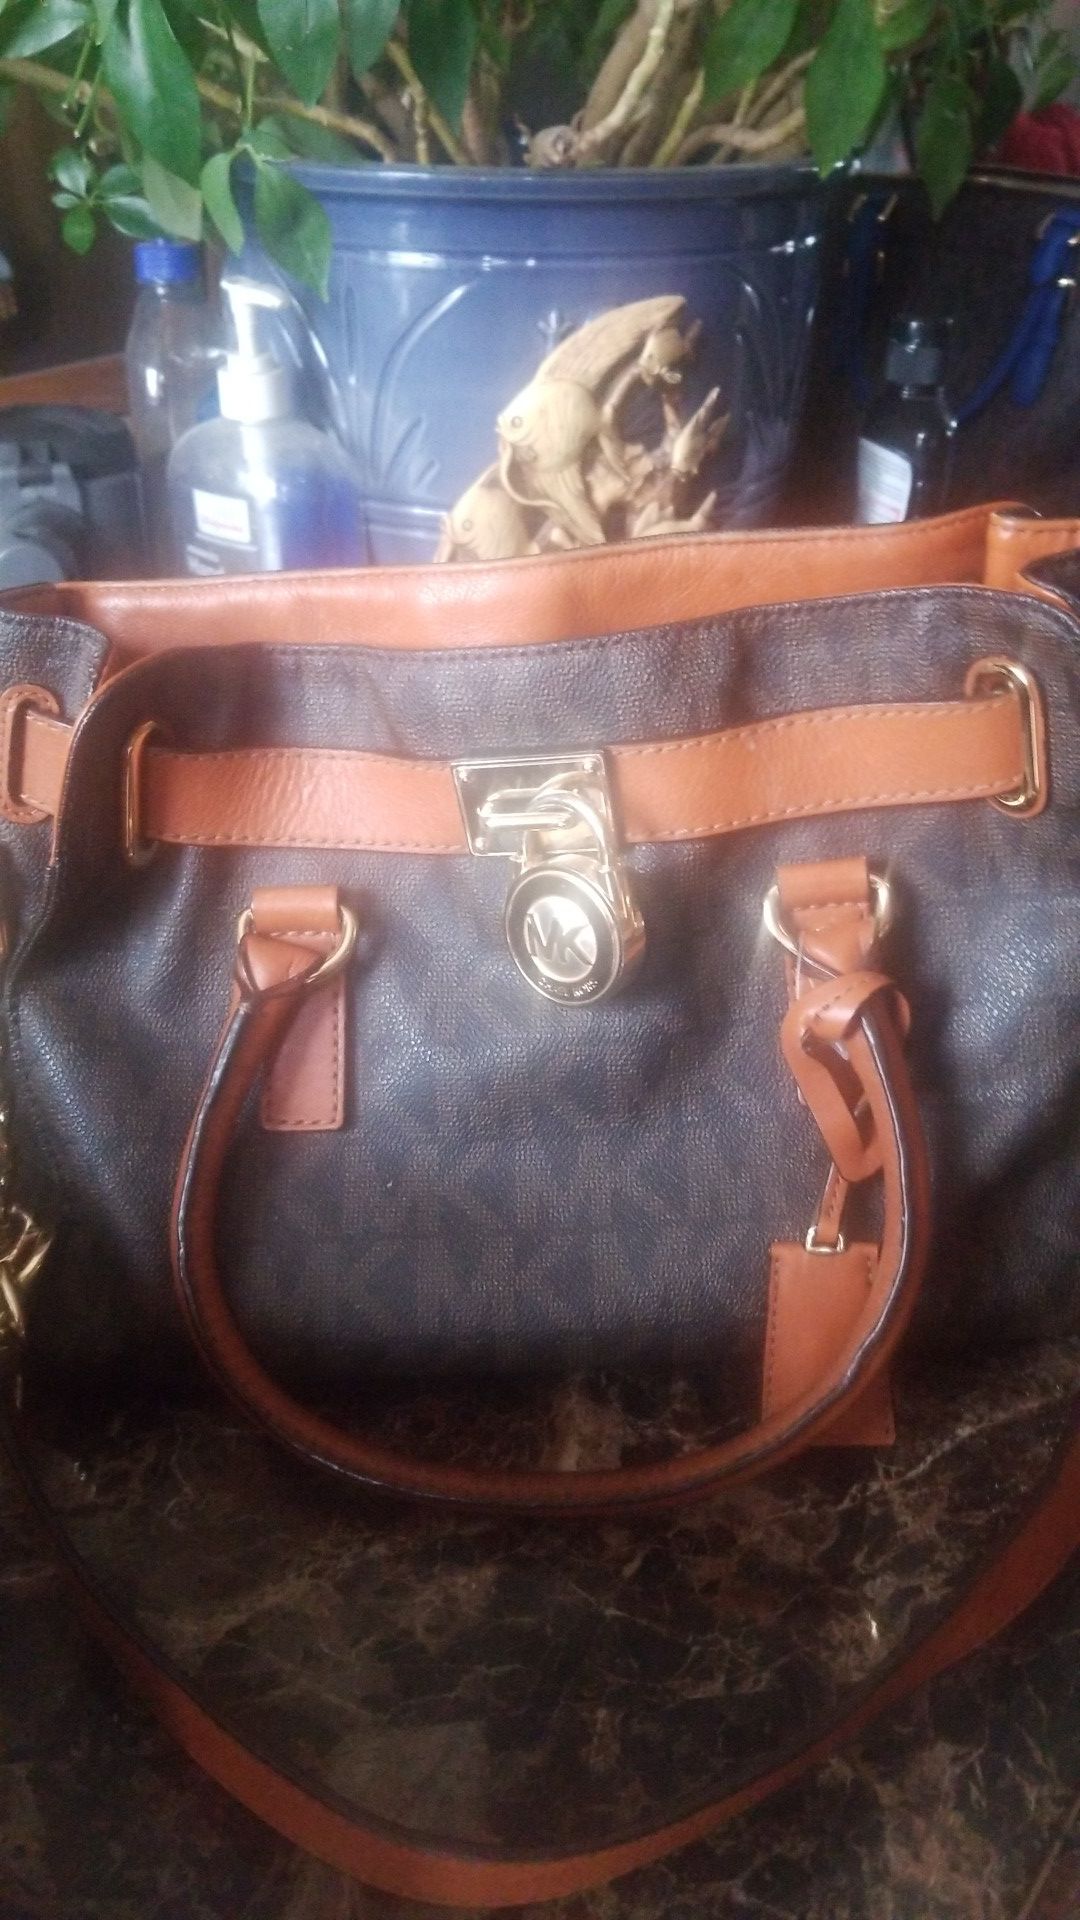 Michael Kors satchel bag leather with gold chain